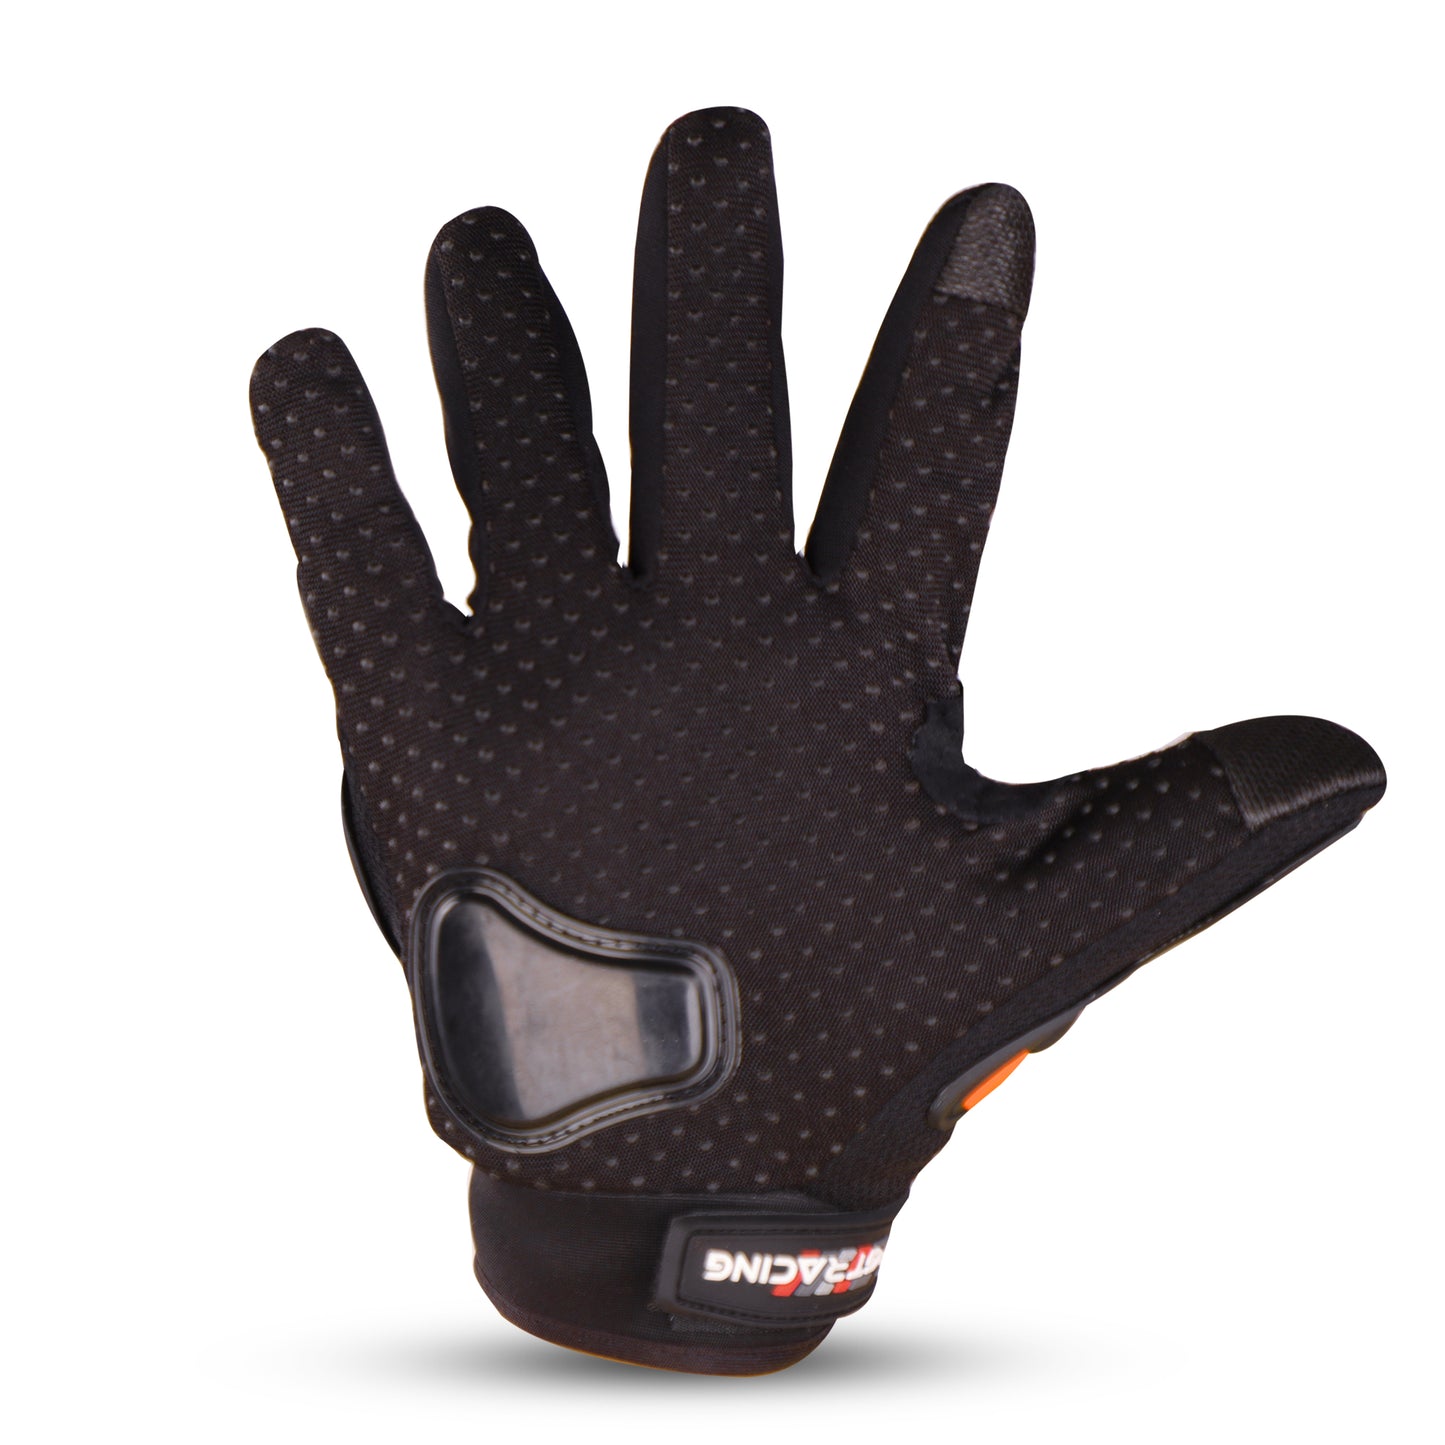 Steelbird GT-01 Full Finger Bike Riding Gloves with Touch Screen Sensitivity at Thumb and Index Finger, Protective Off-Road Motorbike Racing (Orange)